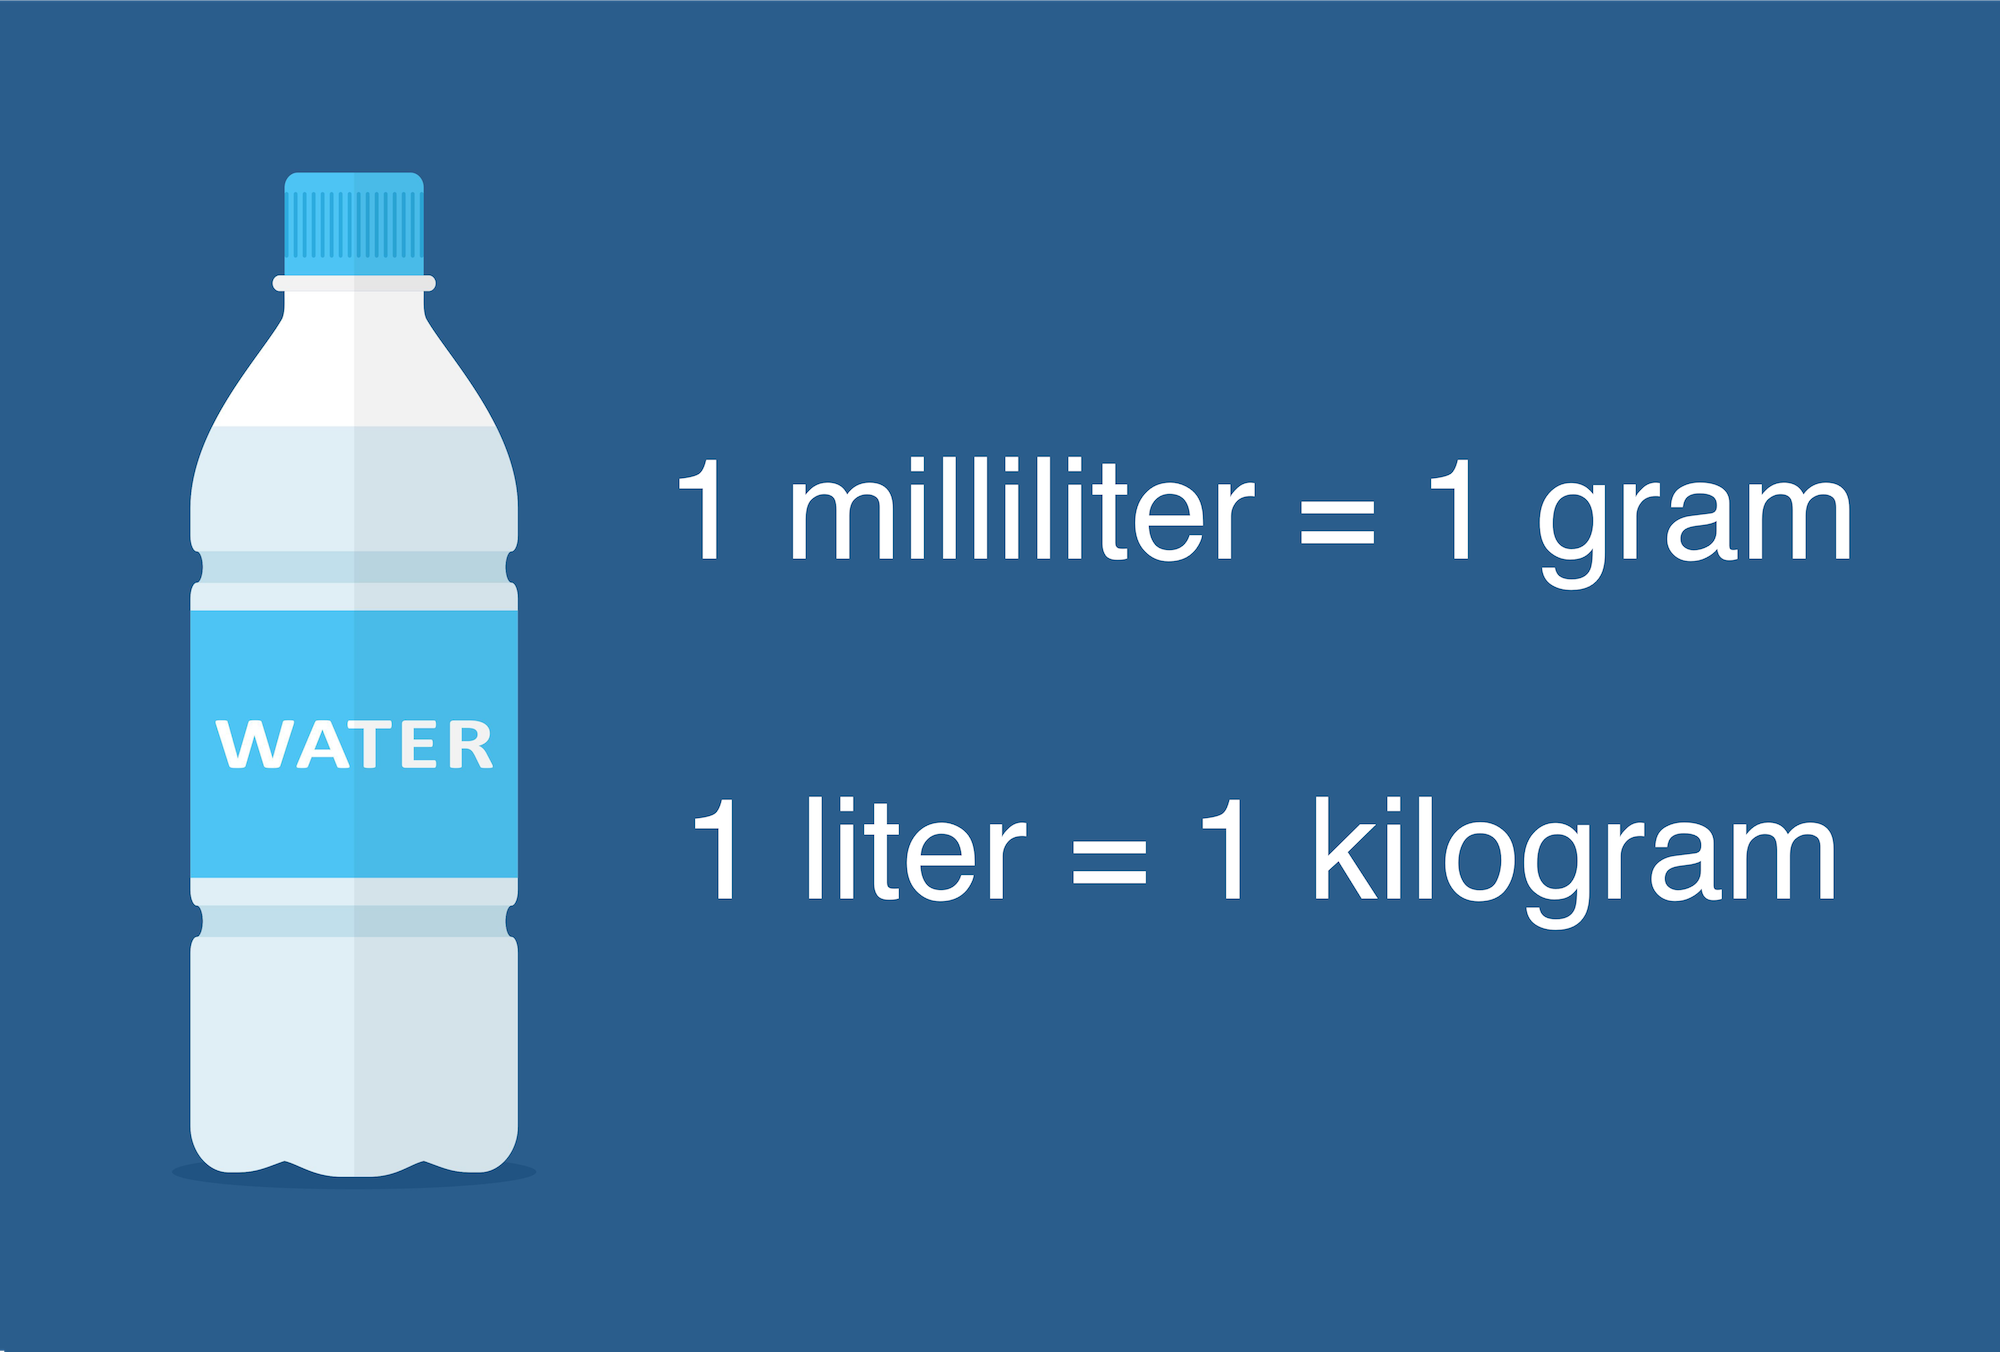 How Much Does A Liter Of Water Weigh?